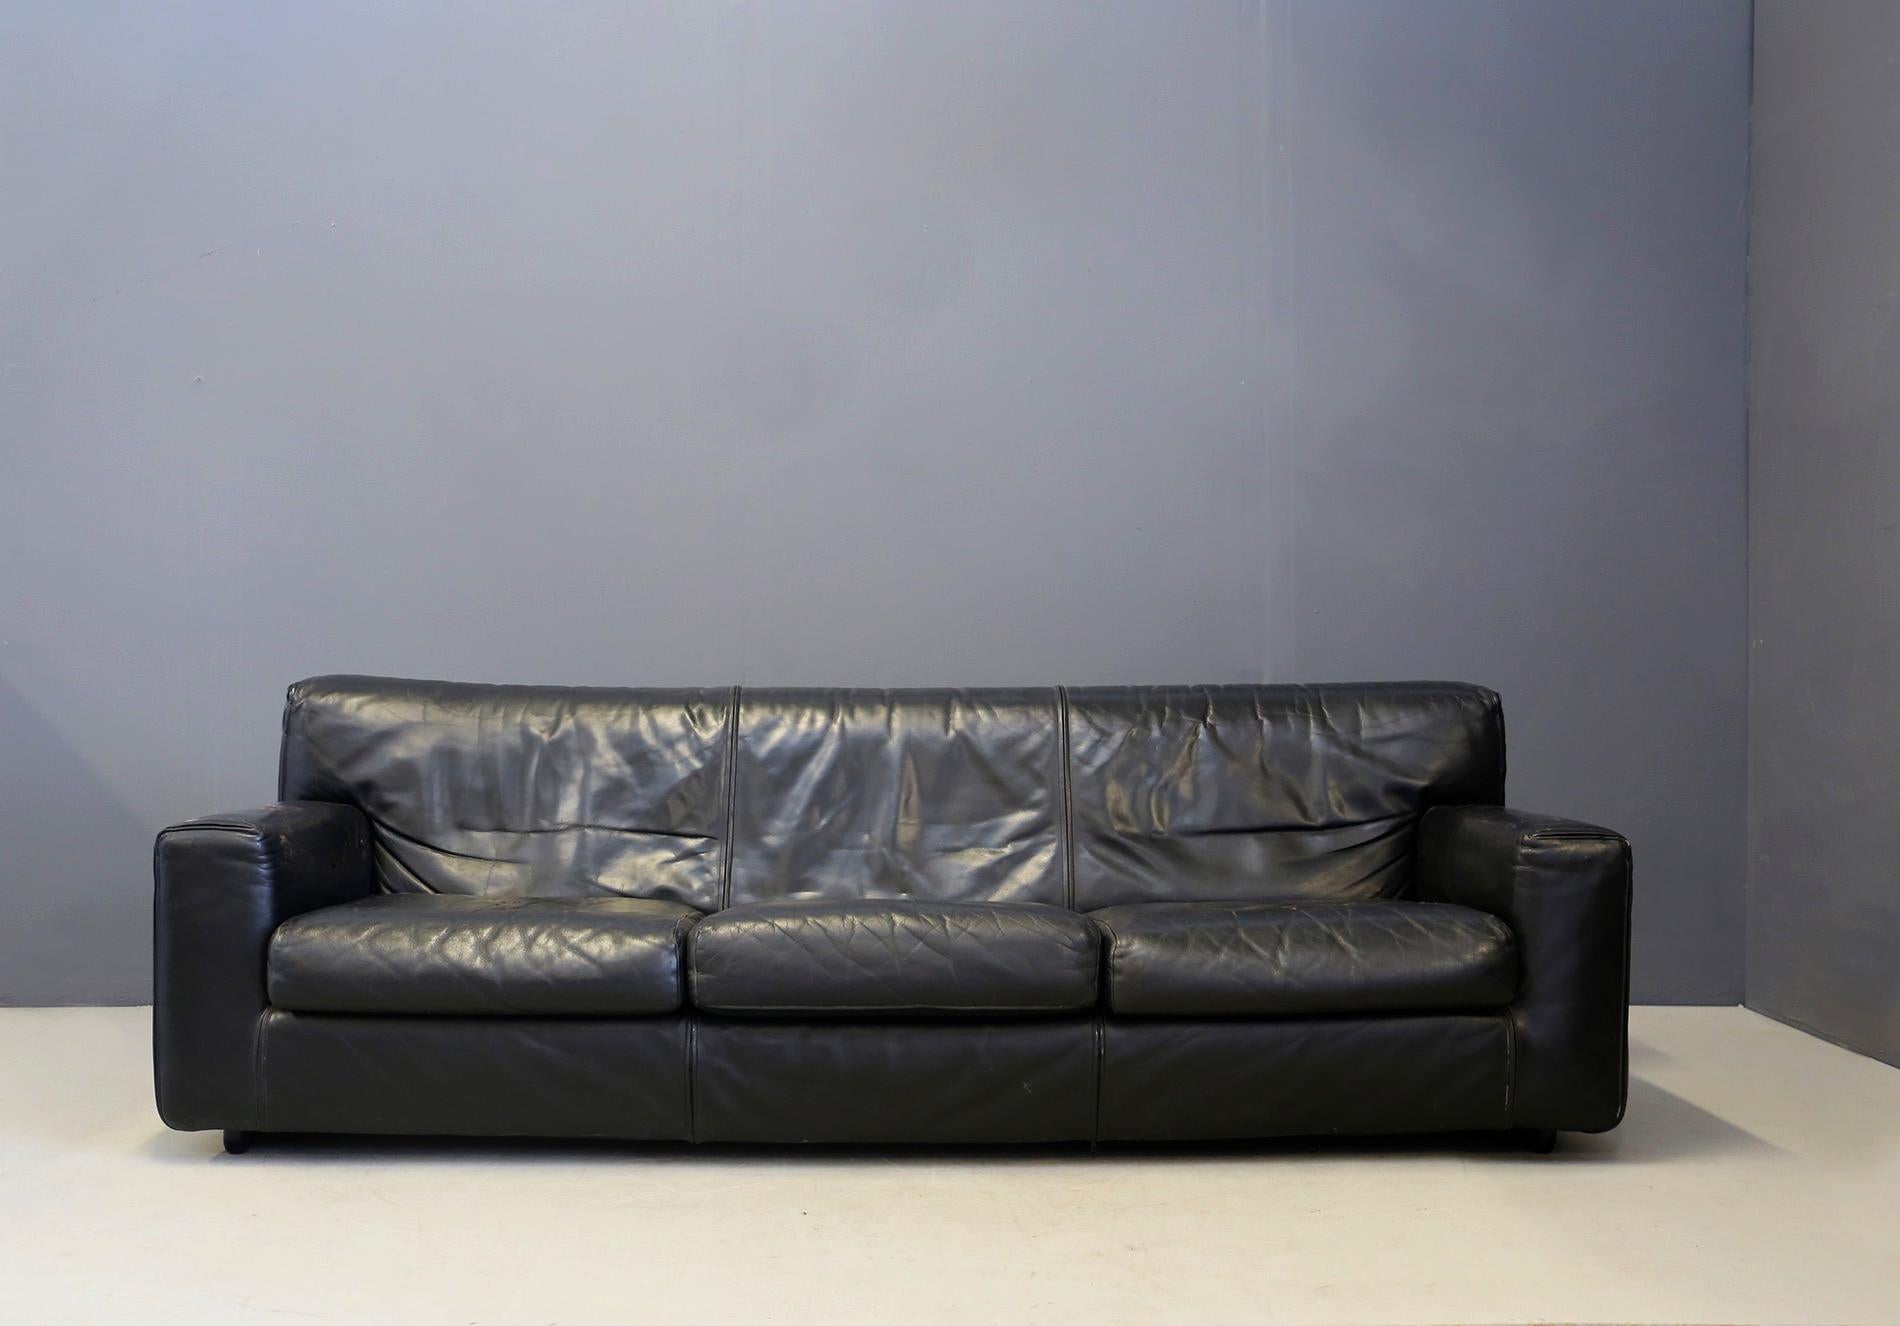 Three-seat sofa made entirely of black leather. The leather upholstery of the sofa is fully lined with its zippers.
We find inside the sofa, the upholstery marked Cassina. The product is in its original condition. The sofa has a very minimalist